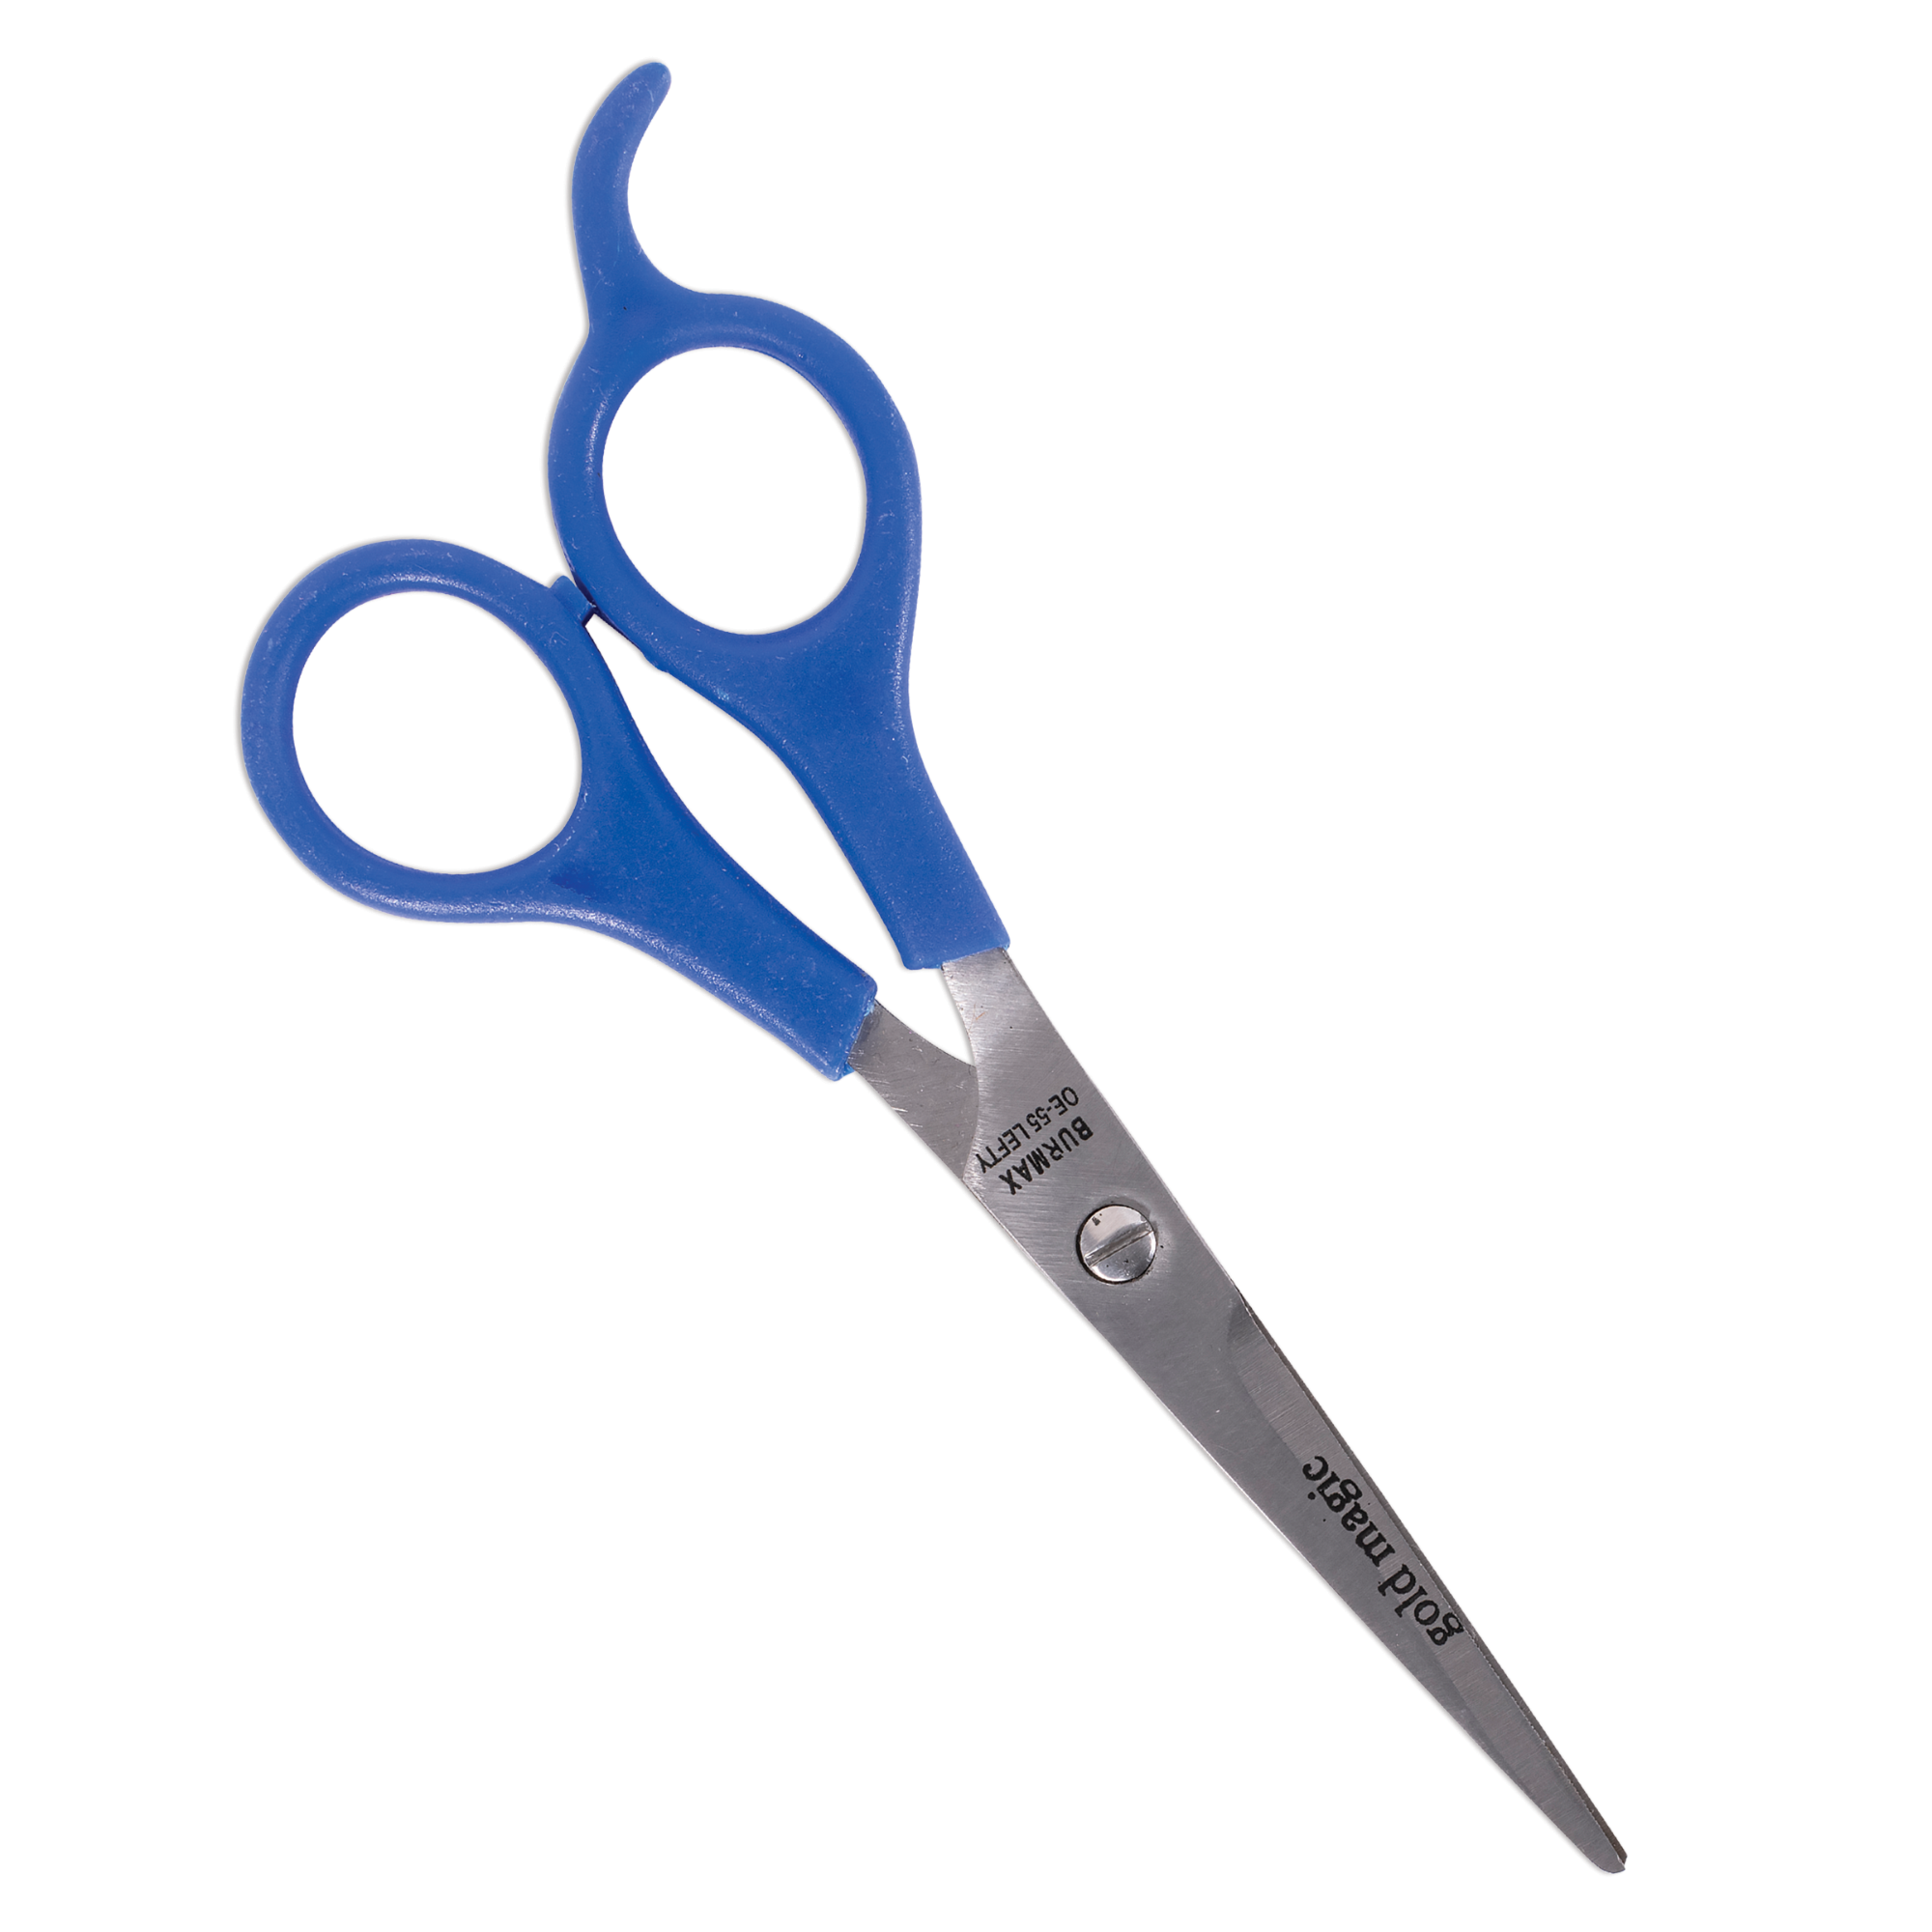 5-1/2" Stainless Steel, Left-Handed Cutting Shear